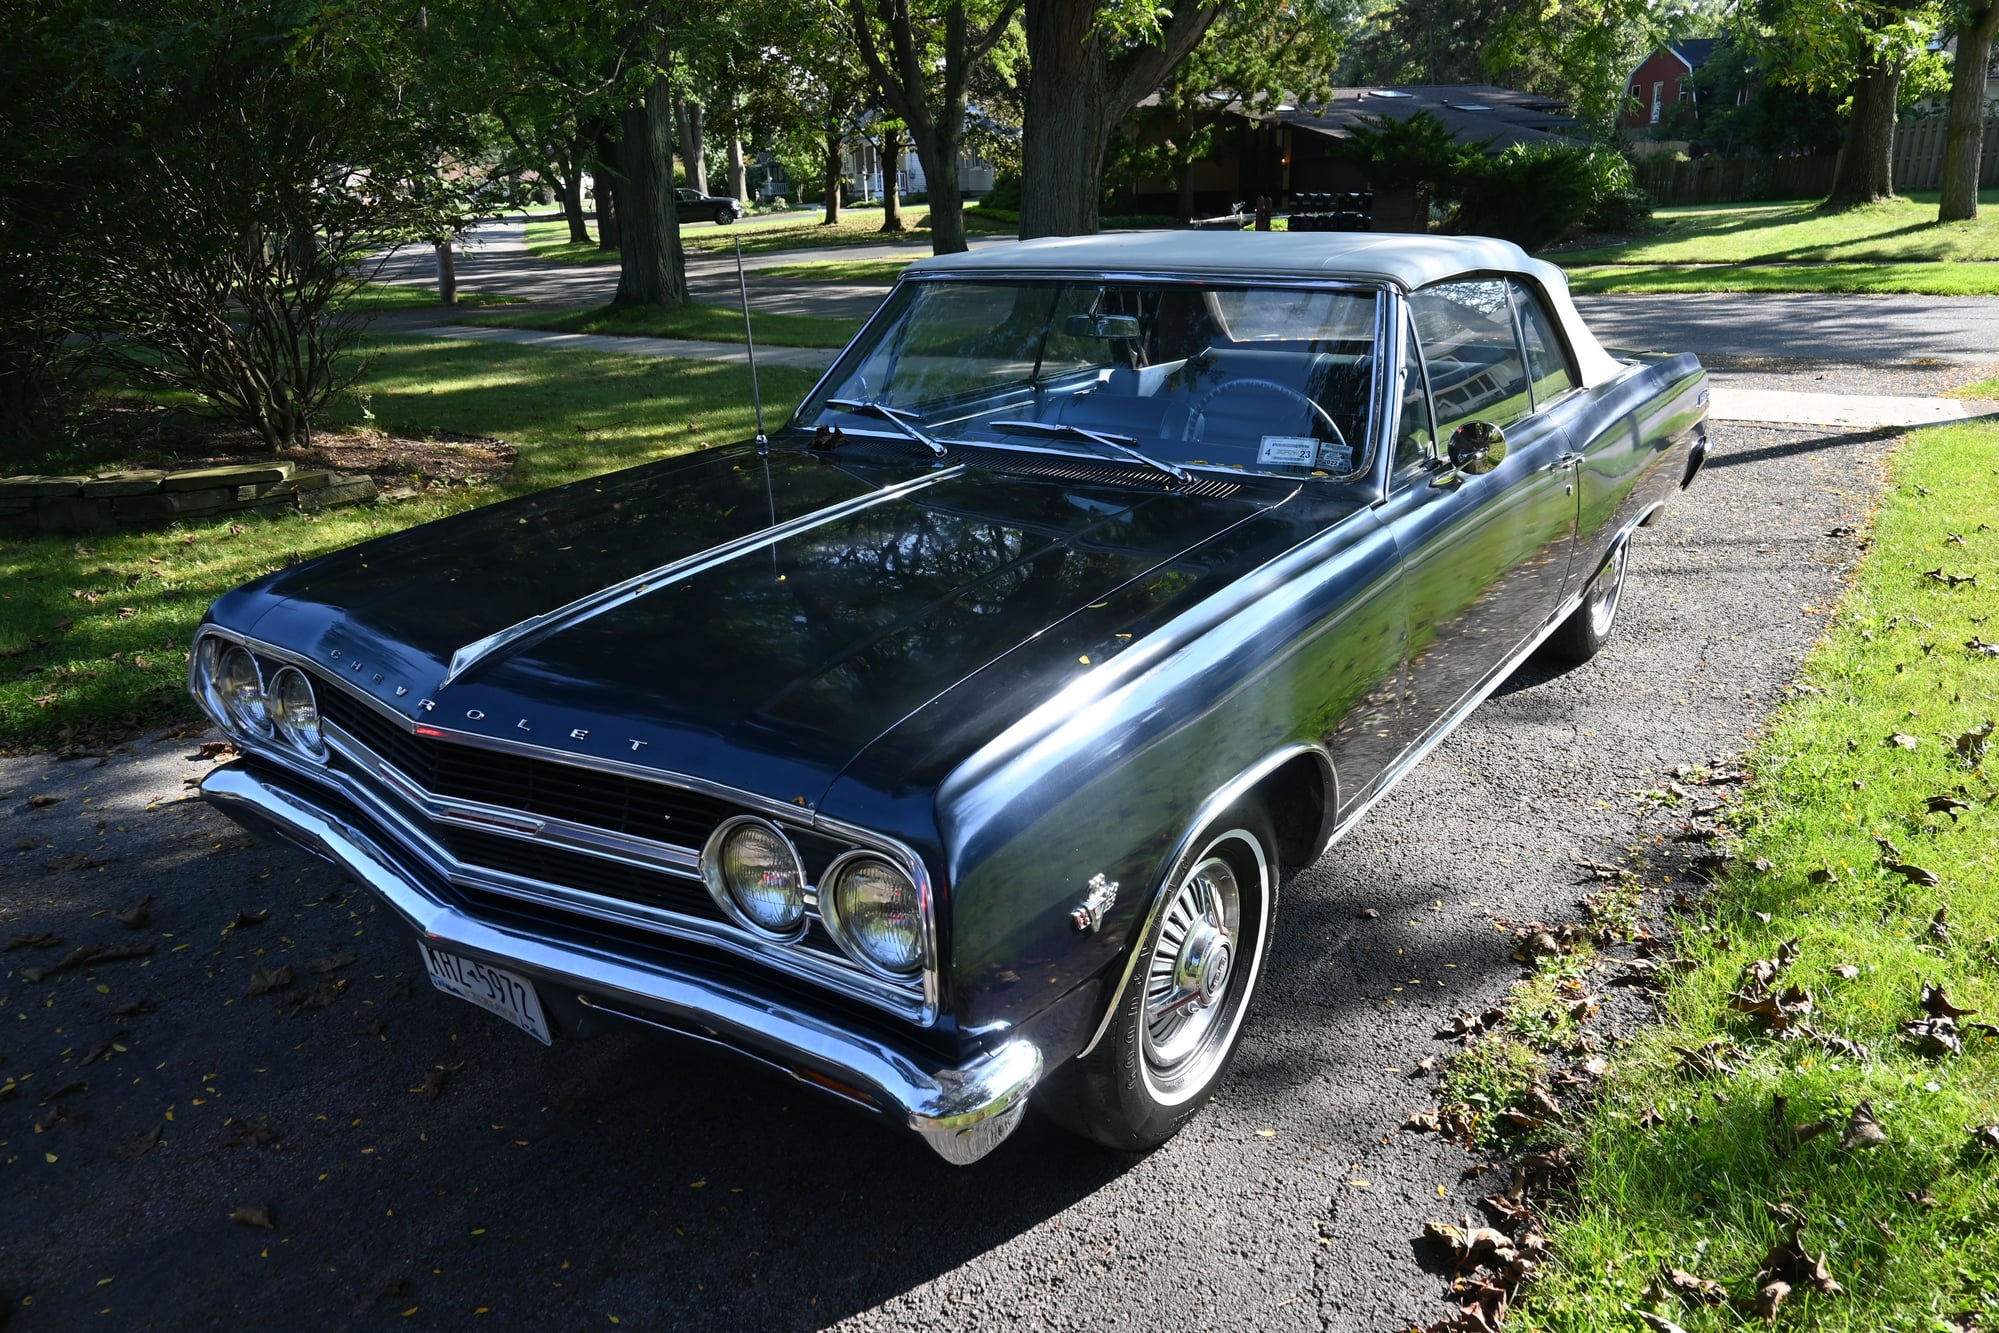 1965 Chevrolet Chevelle - 1965 Chevelle Malibu SS Convertible 283 4 Speed Original - Used - VIN 138675B128934 - 91,000 Miles - 8 cyl - 2WD - Manual - Convertible - Blue - Rochester, NY 14609, United States